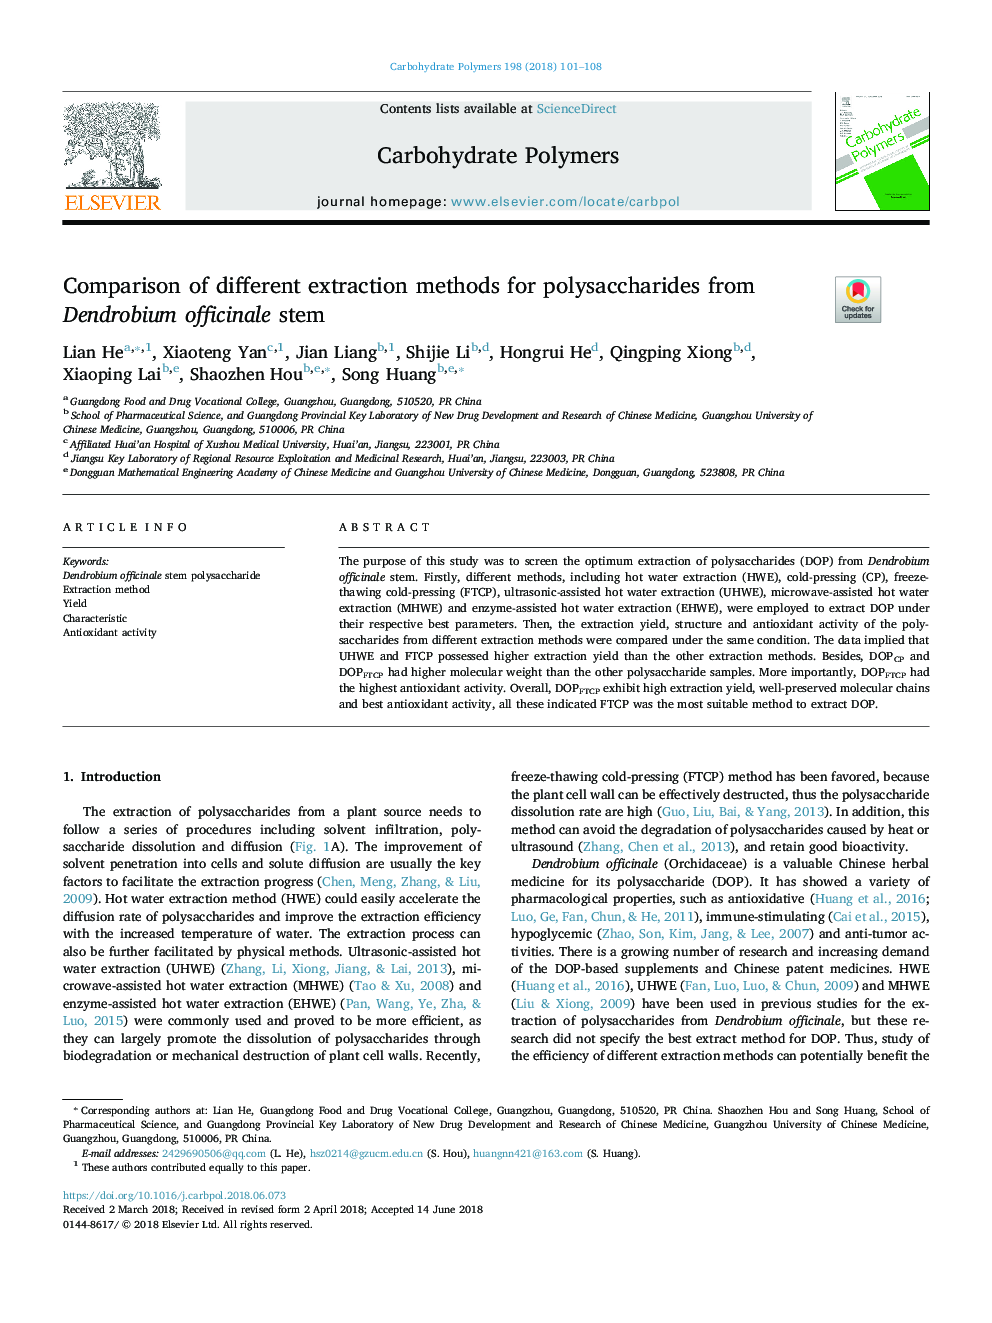 Comparison of different extraction methods for polysaccharides from Dendrobium officinale stem